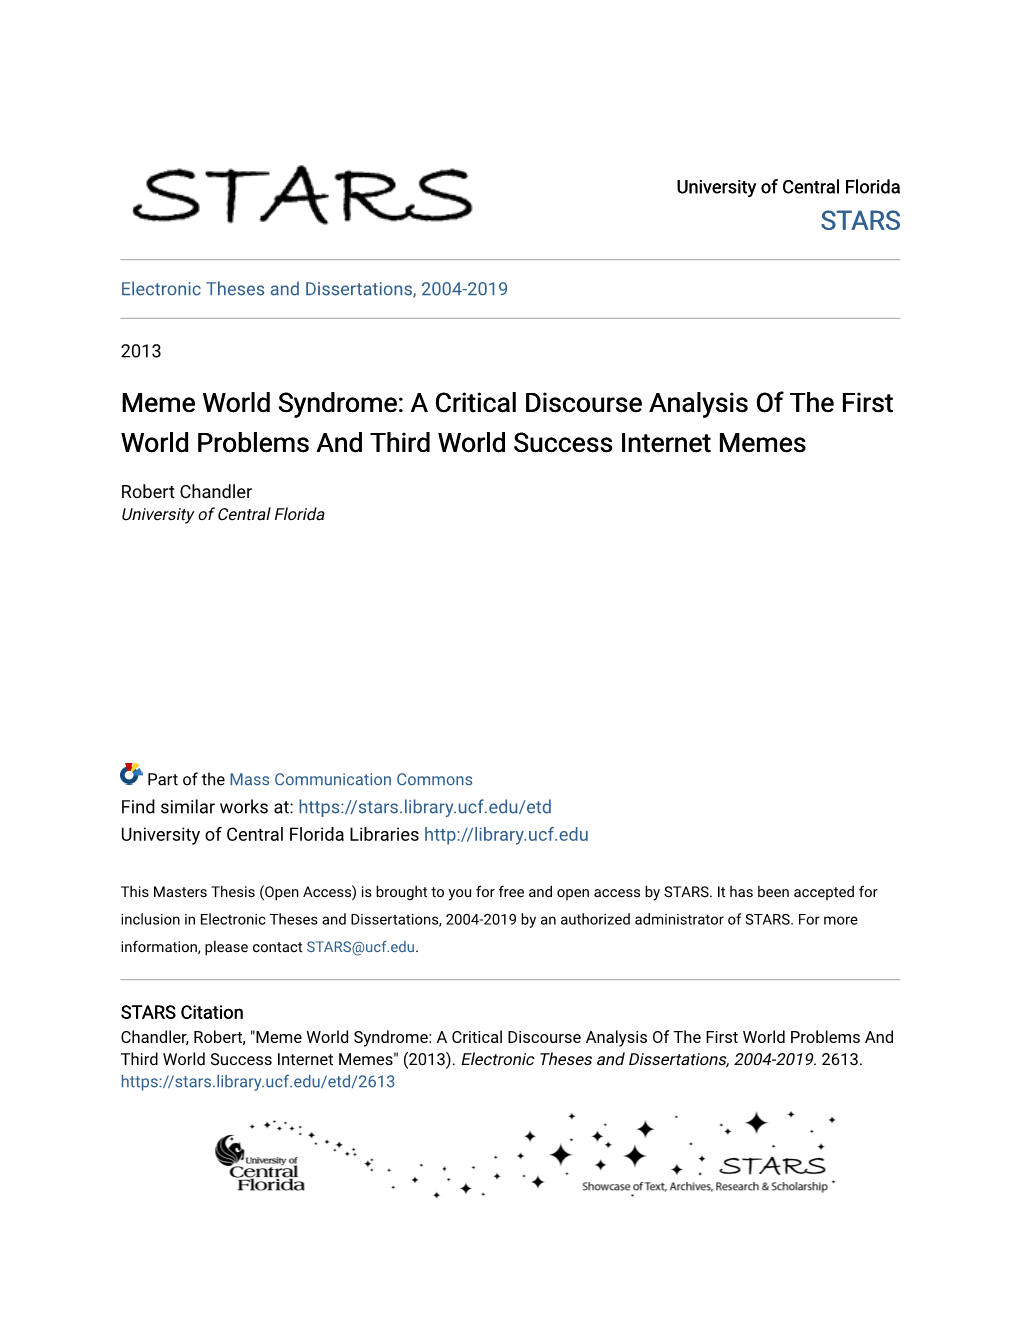 Meme World Syndrome: a Critical Discourse Analysis of the First World Problems and Third World Success Internet Memes